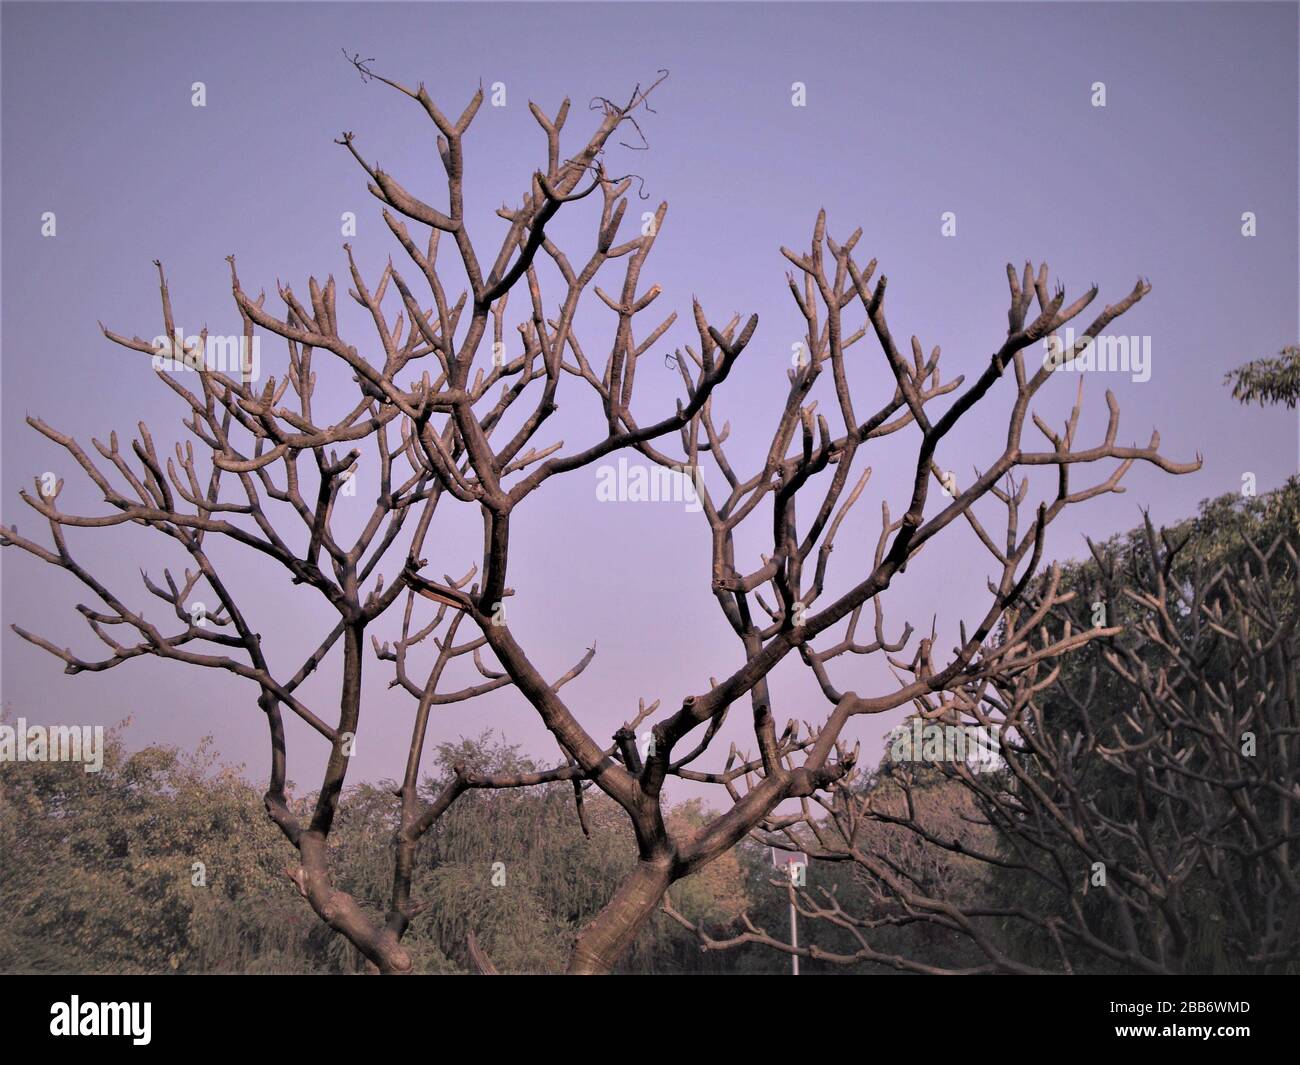 Amazing tree with tiny branches but no leaves with pinkish blue sky on backdrop, India Stock Photo